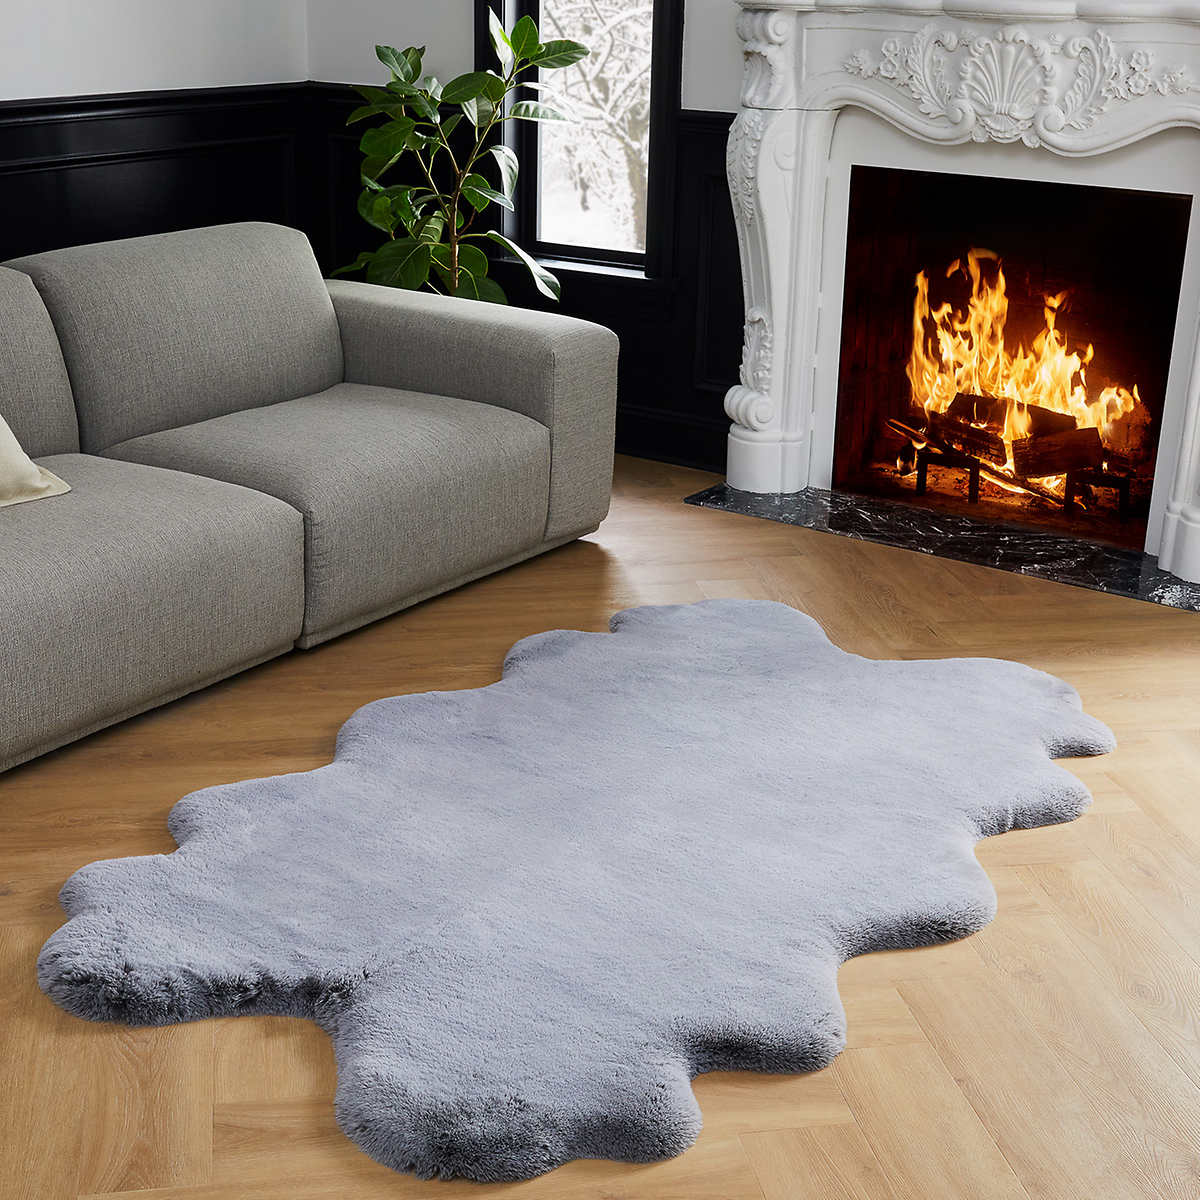 NEW - Costco - Mon Chateau Luxe Faux Fur 3’7” x 5’11” Rug - Retail $69